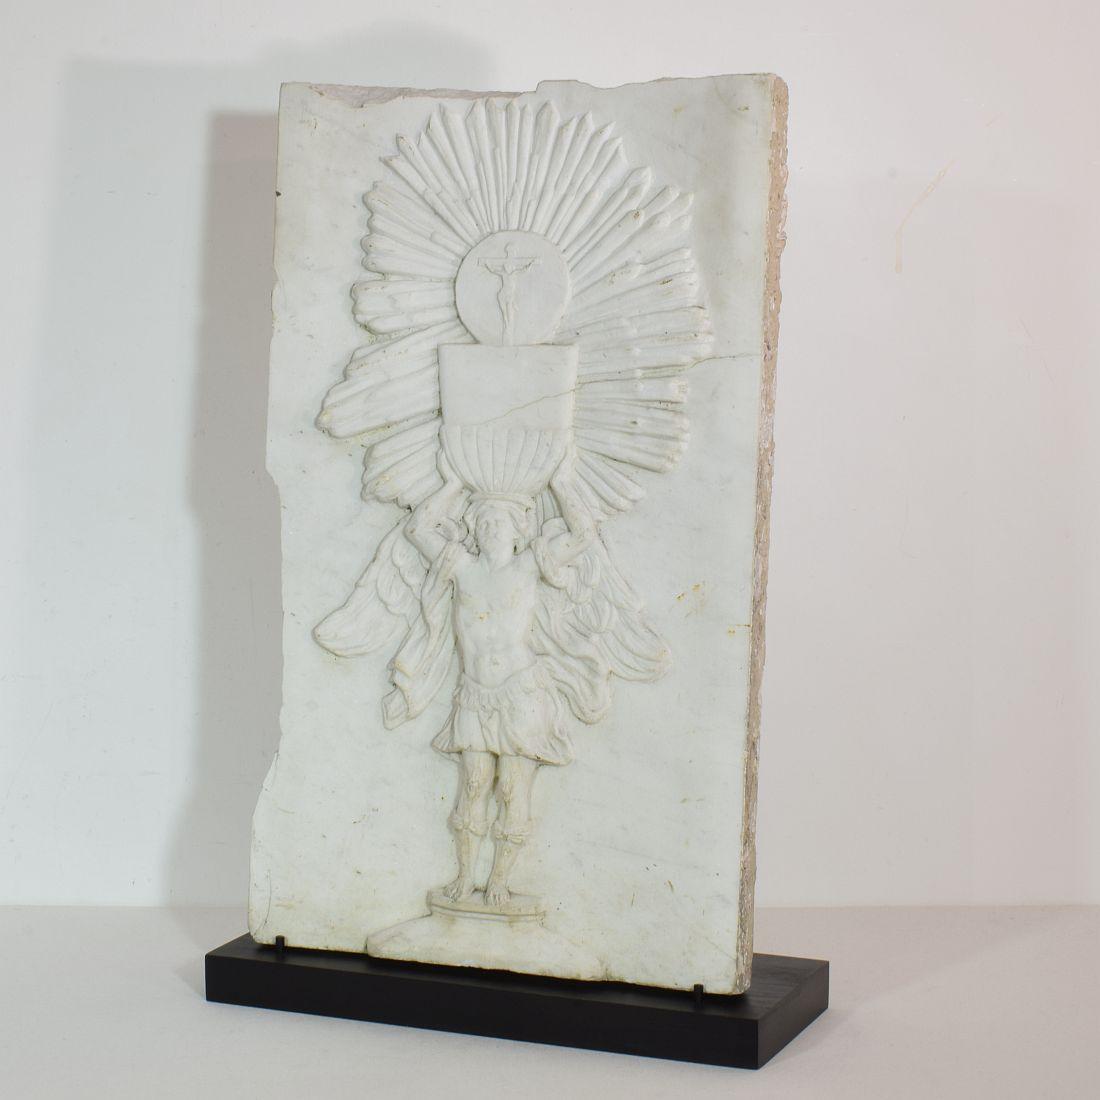 Unique and beautiful weathered white marble panel representing an angel holding a chalice with sunburst and crucified Christ figure . Well detailed, Italy, circa 1650-1750. Weathered, small losses.